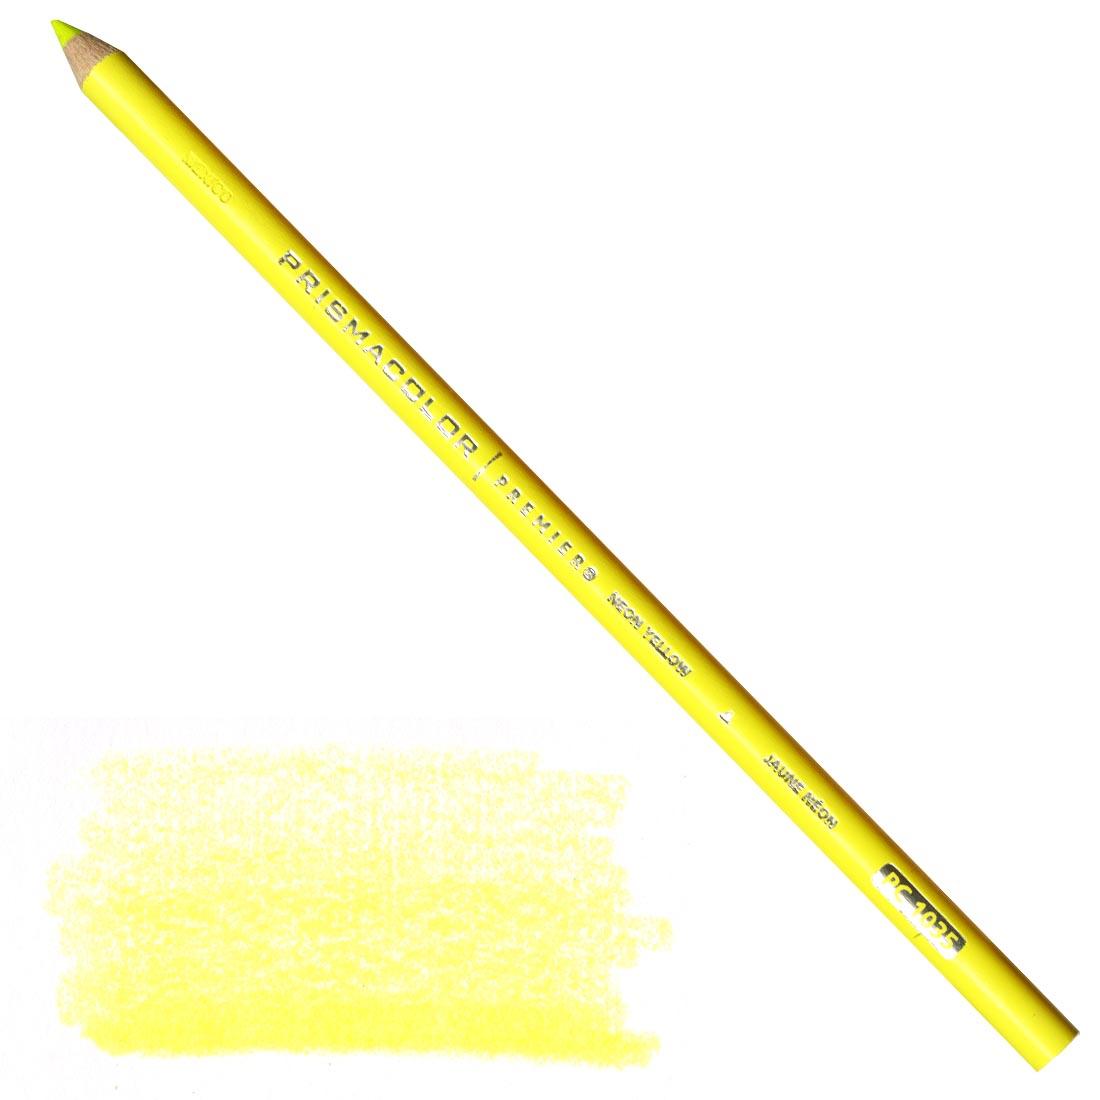 Neon Yellow Prismacolor Premier Colored Pencil with a sample colored swatch